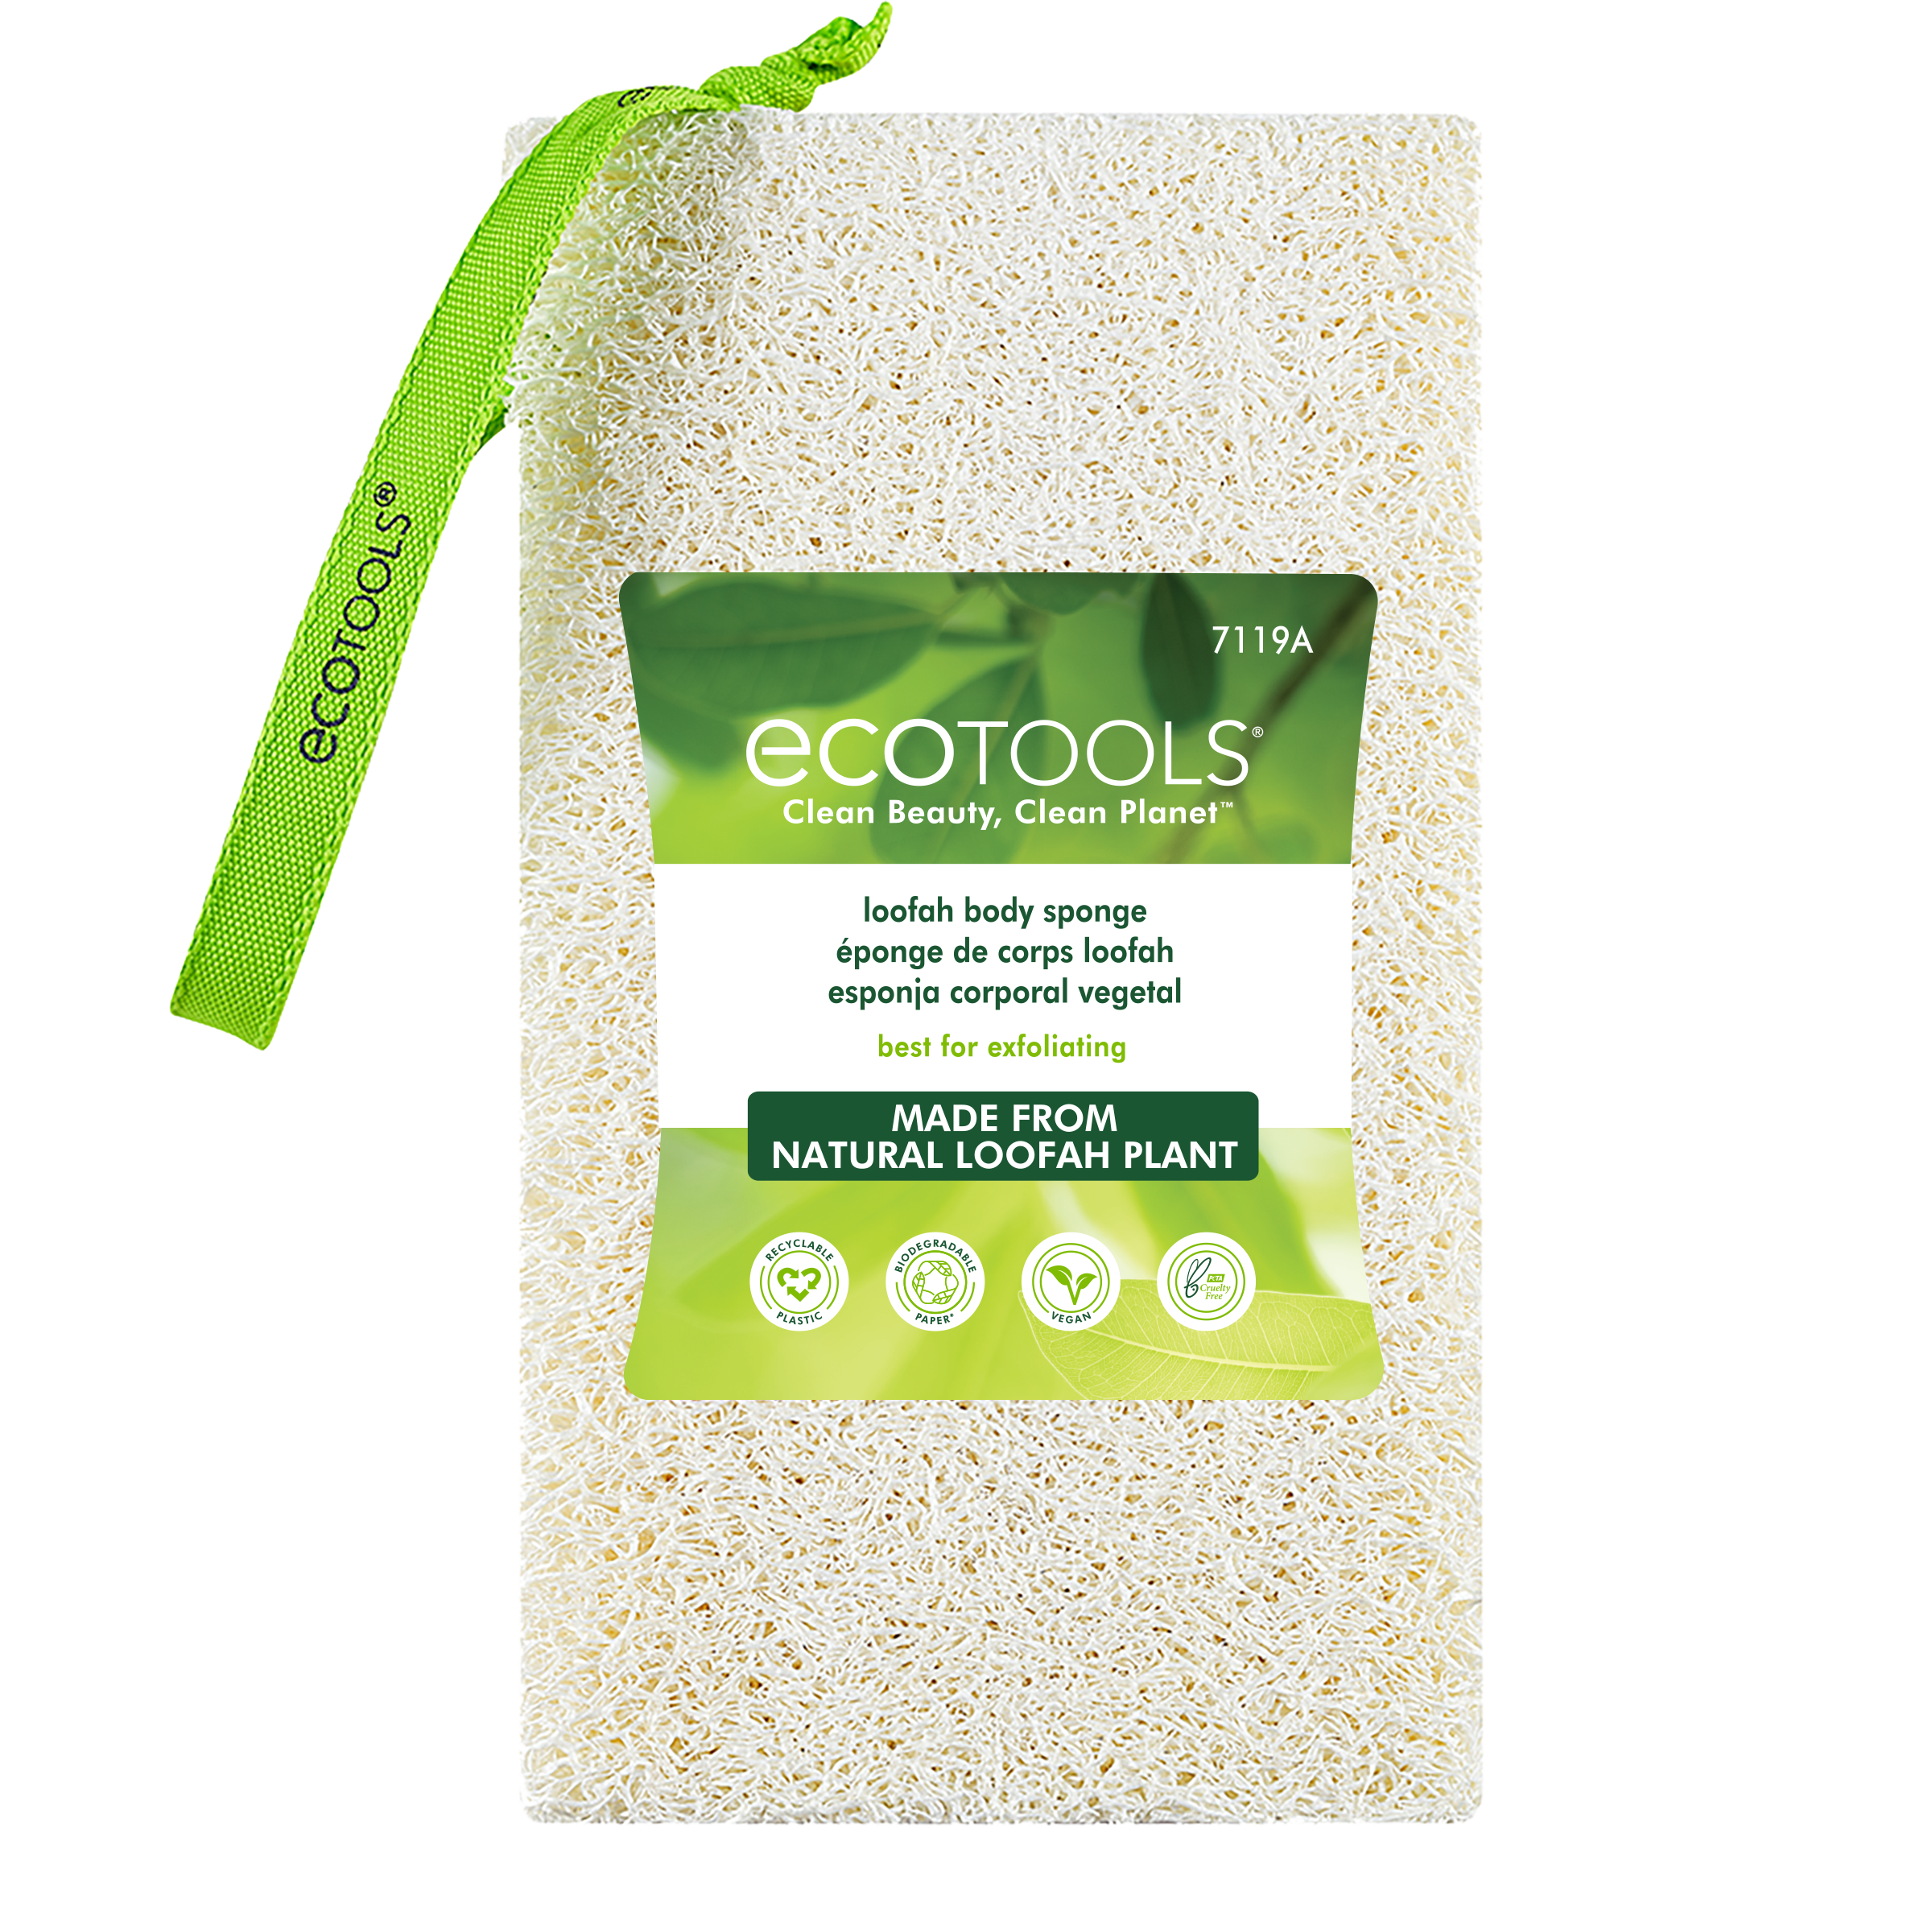 Natural Loofah Exfoliating Bath Sponge by Spa Destinations 3 Pack of